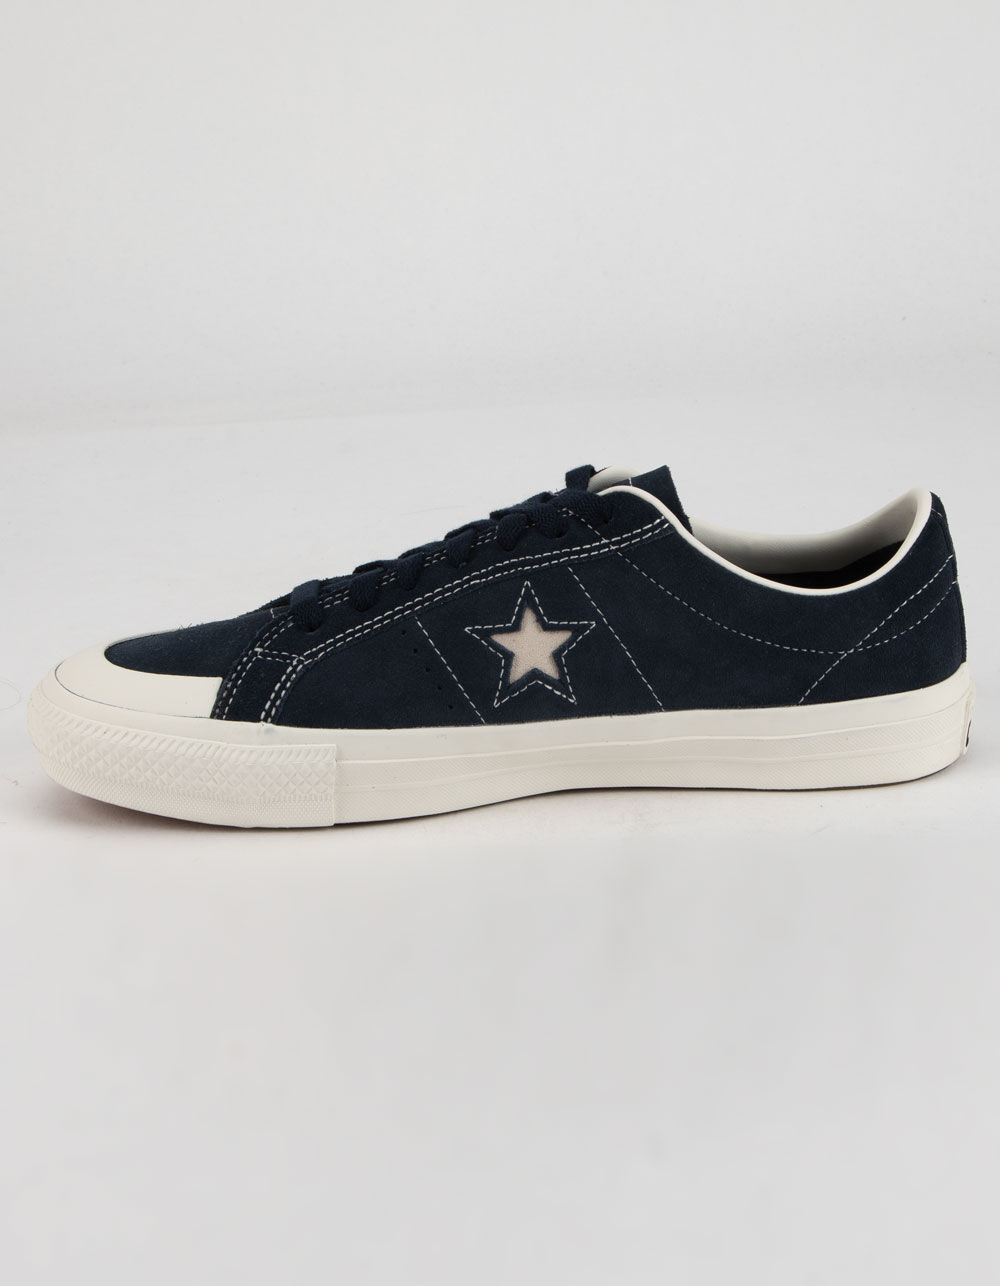 CONVERSE Alexis Sablone One Star Pro Suede Low Top Shoes